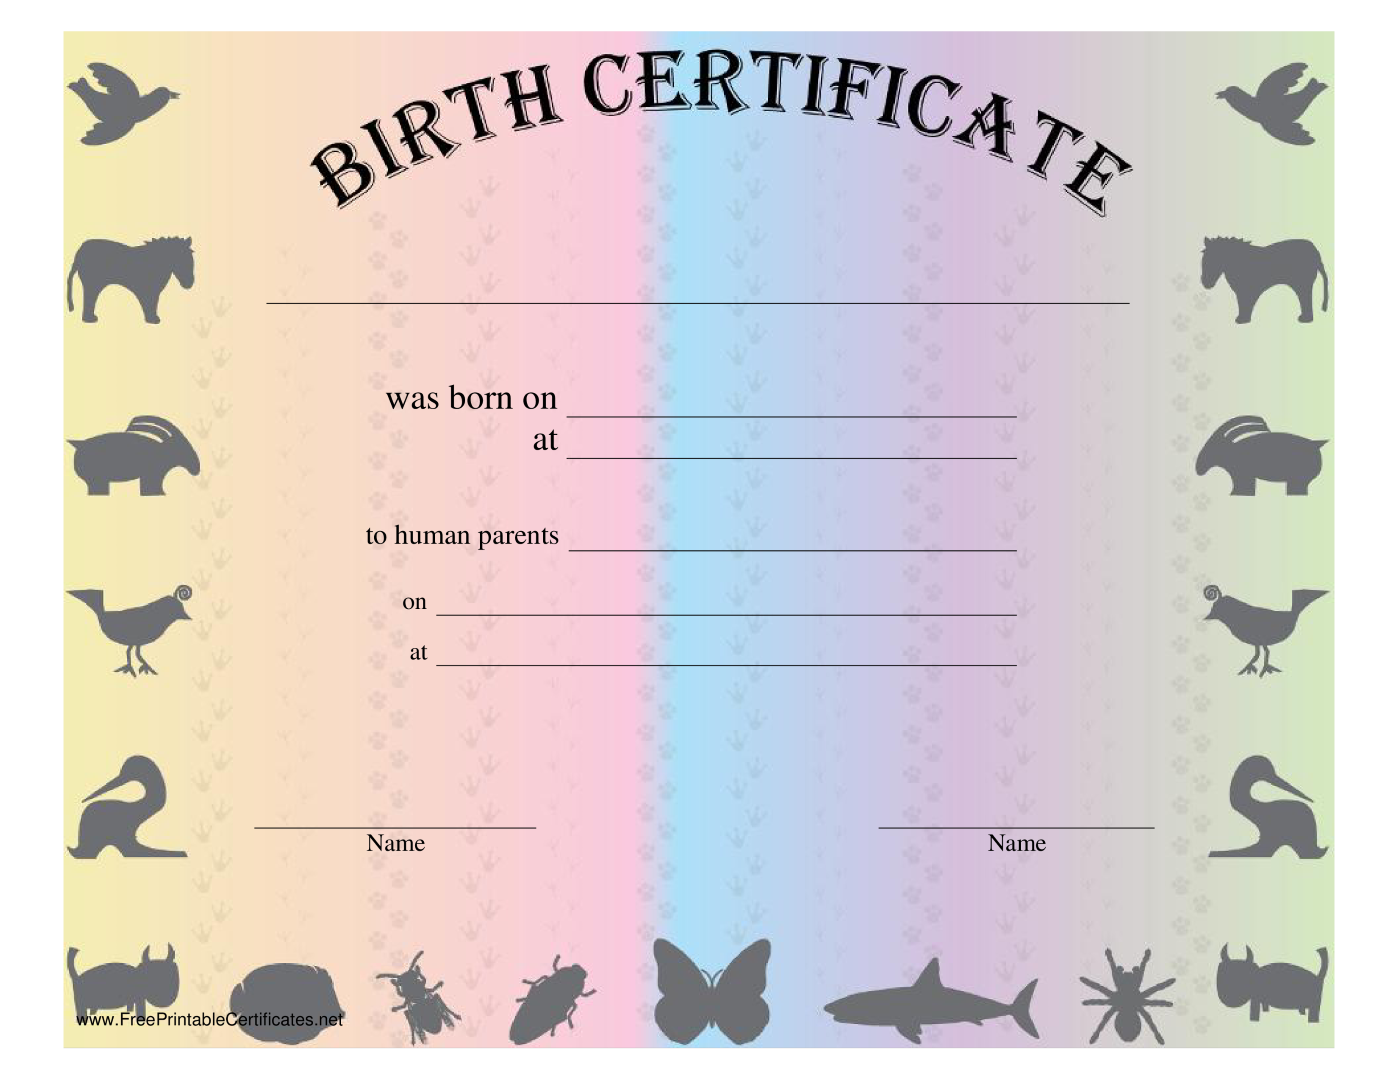 Printable Birth Certificate for Animals 模板